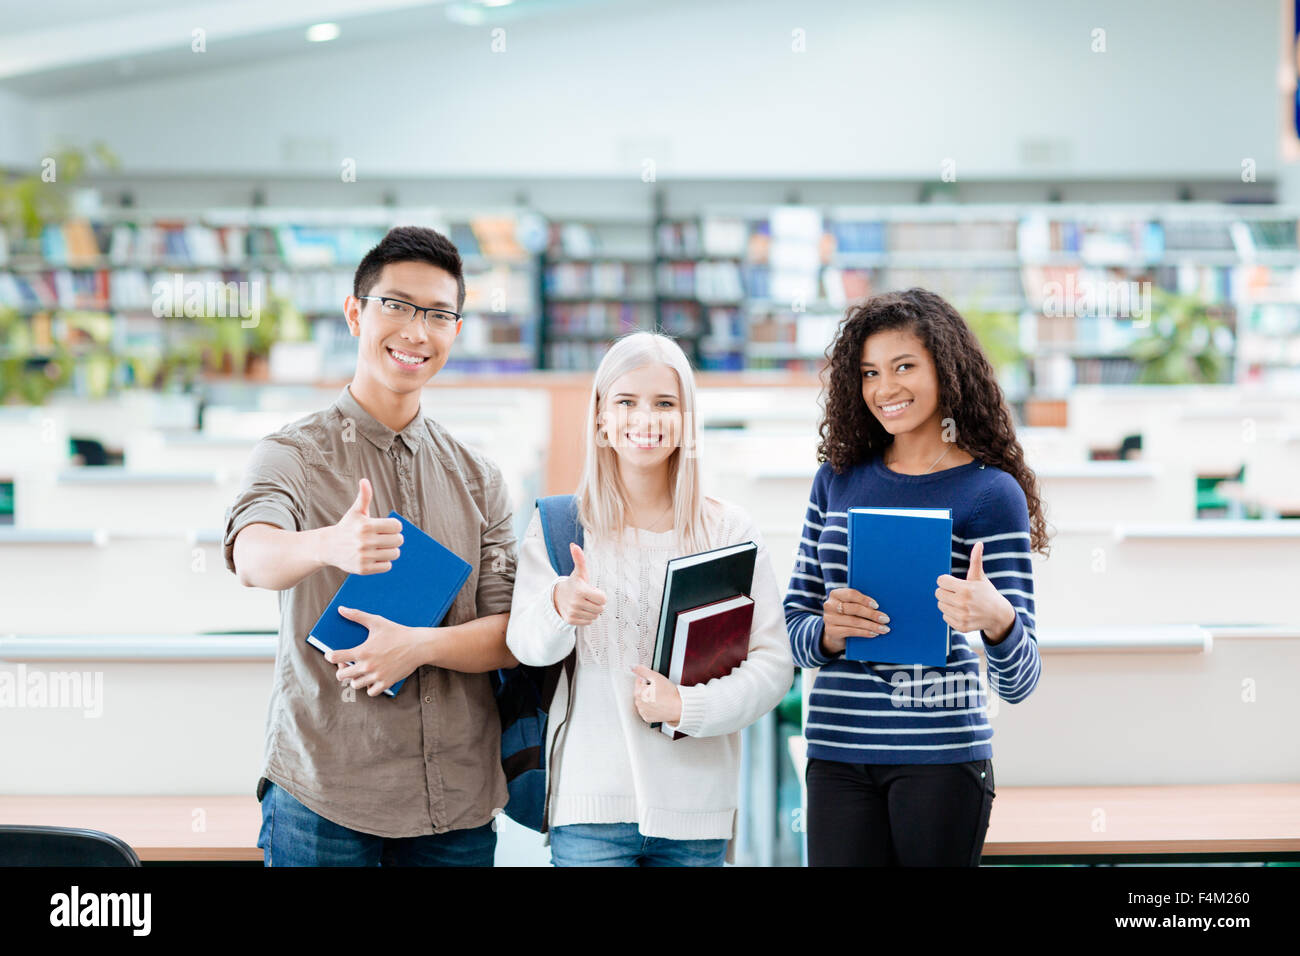 Portrait of a happy multi ethnic students standing in university library and showing thumbs up Stock Photo